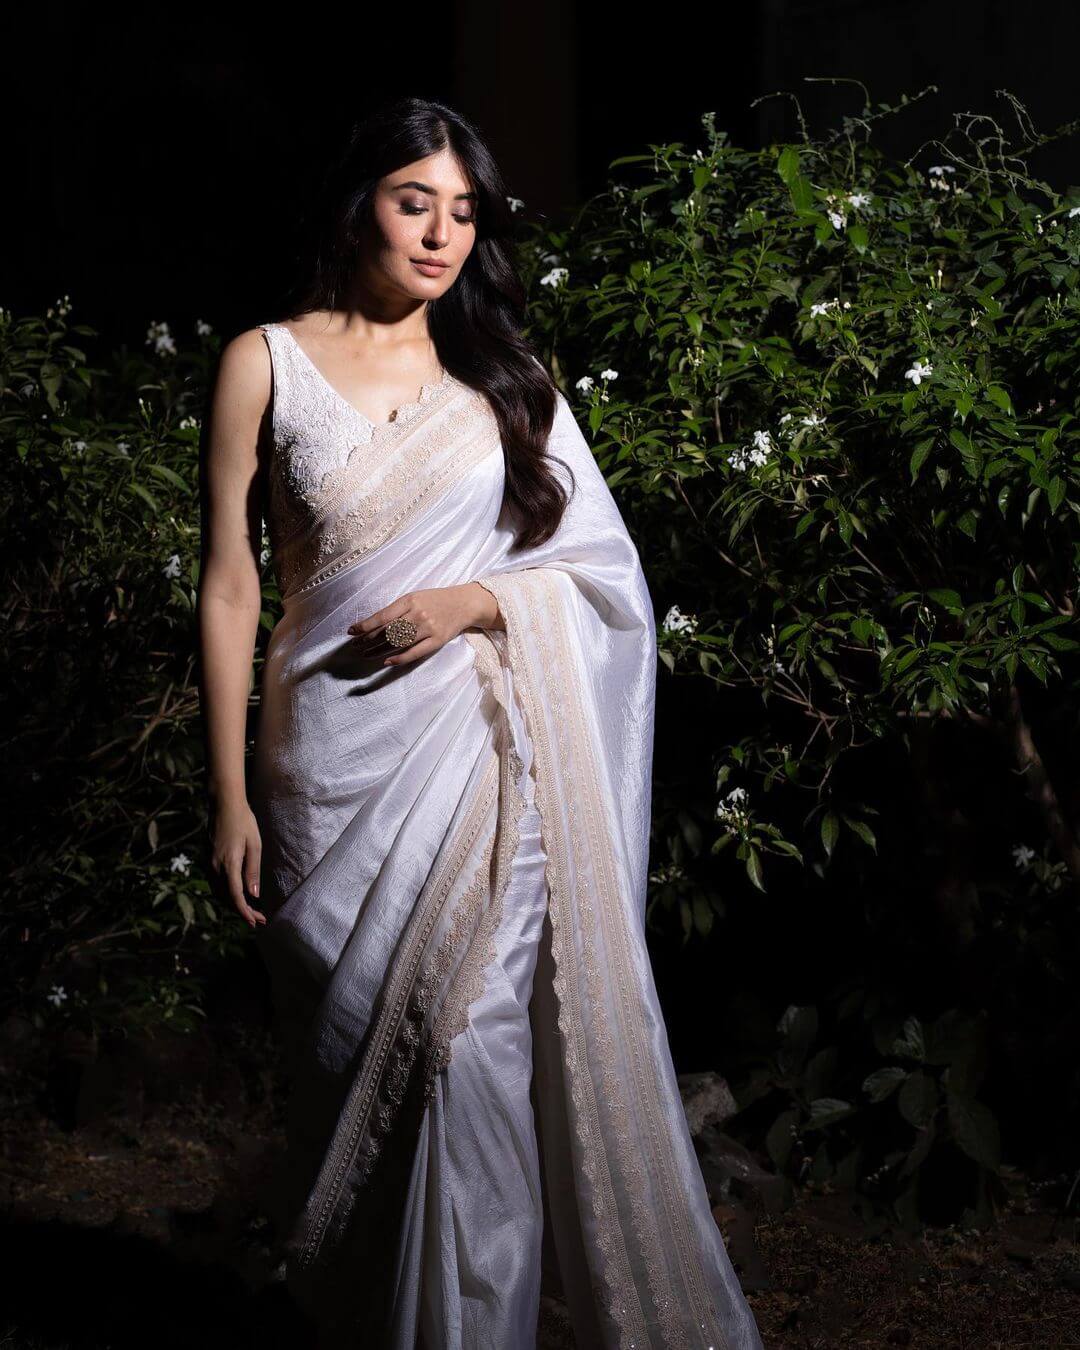 Tv Actress Kritika Kamra Draped In Ivory Saree For Her Movie Bheed Promotion